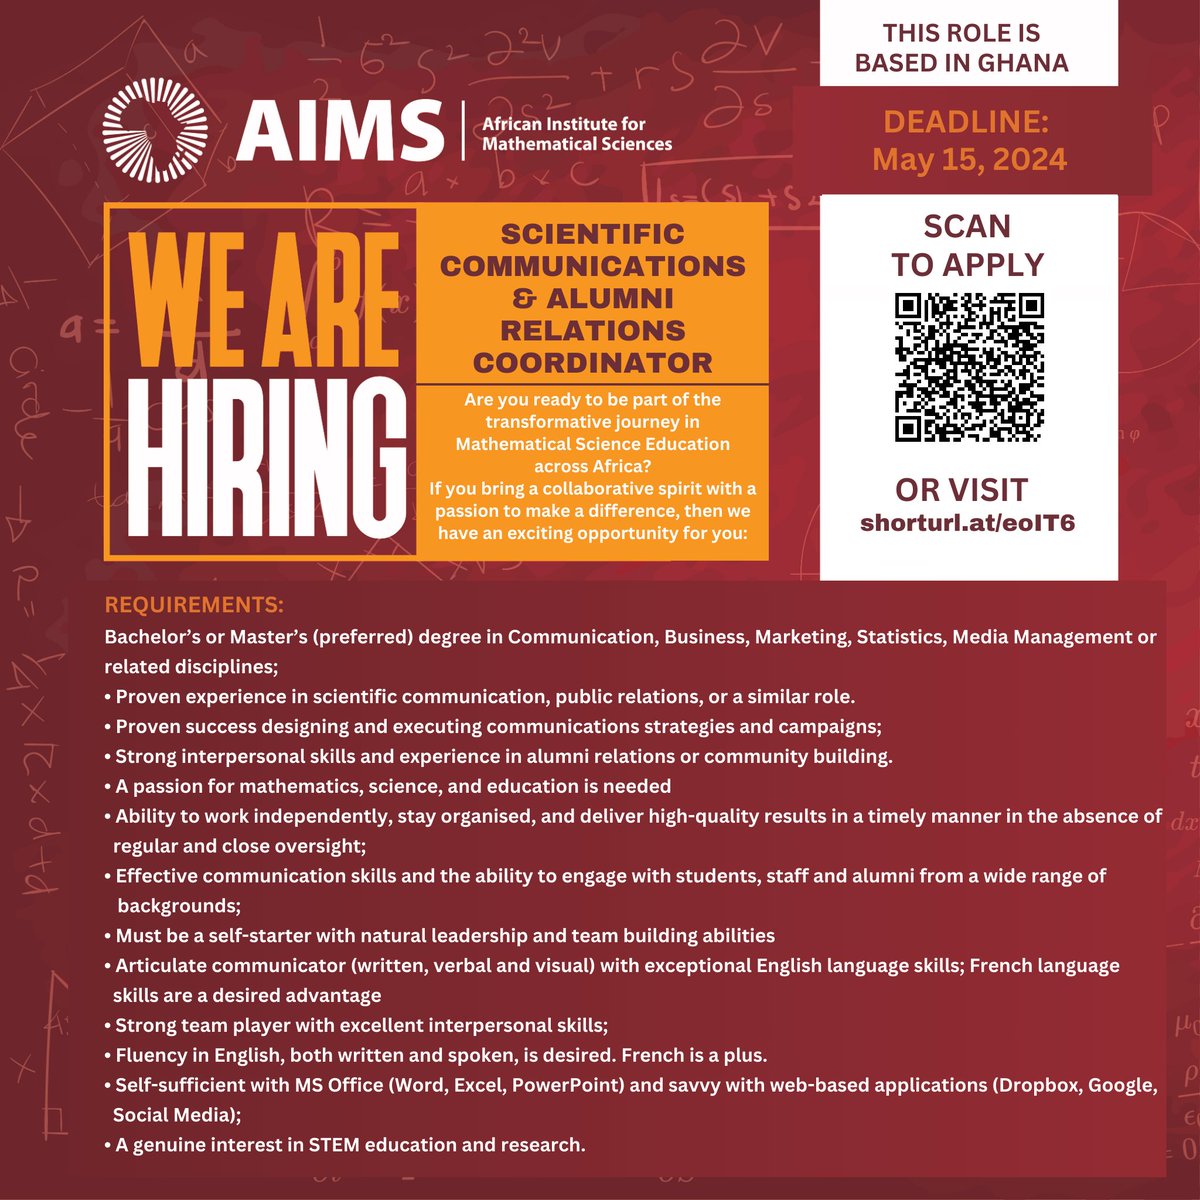 #Opportunity Join our team at AIMS! 🚀We seek passionate individuals to drive academic excellence & scientific #communication across the network! 🔍 Academic Director - Undergrad: shorturl.at/hmwD0 📢 Scientific Comms & Alum Relations Coordinator: shorturl.at/eolT6